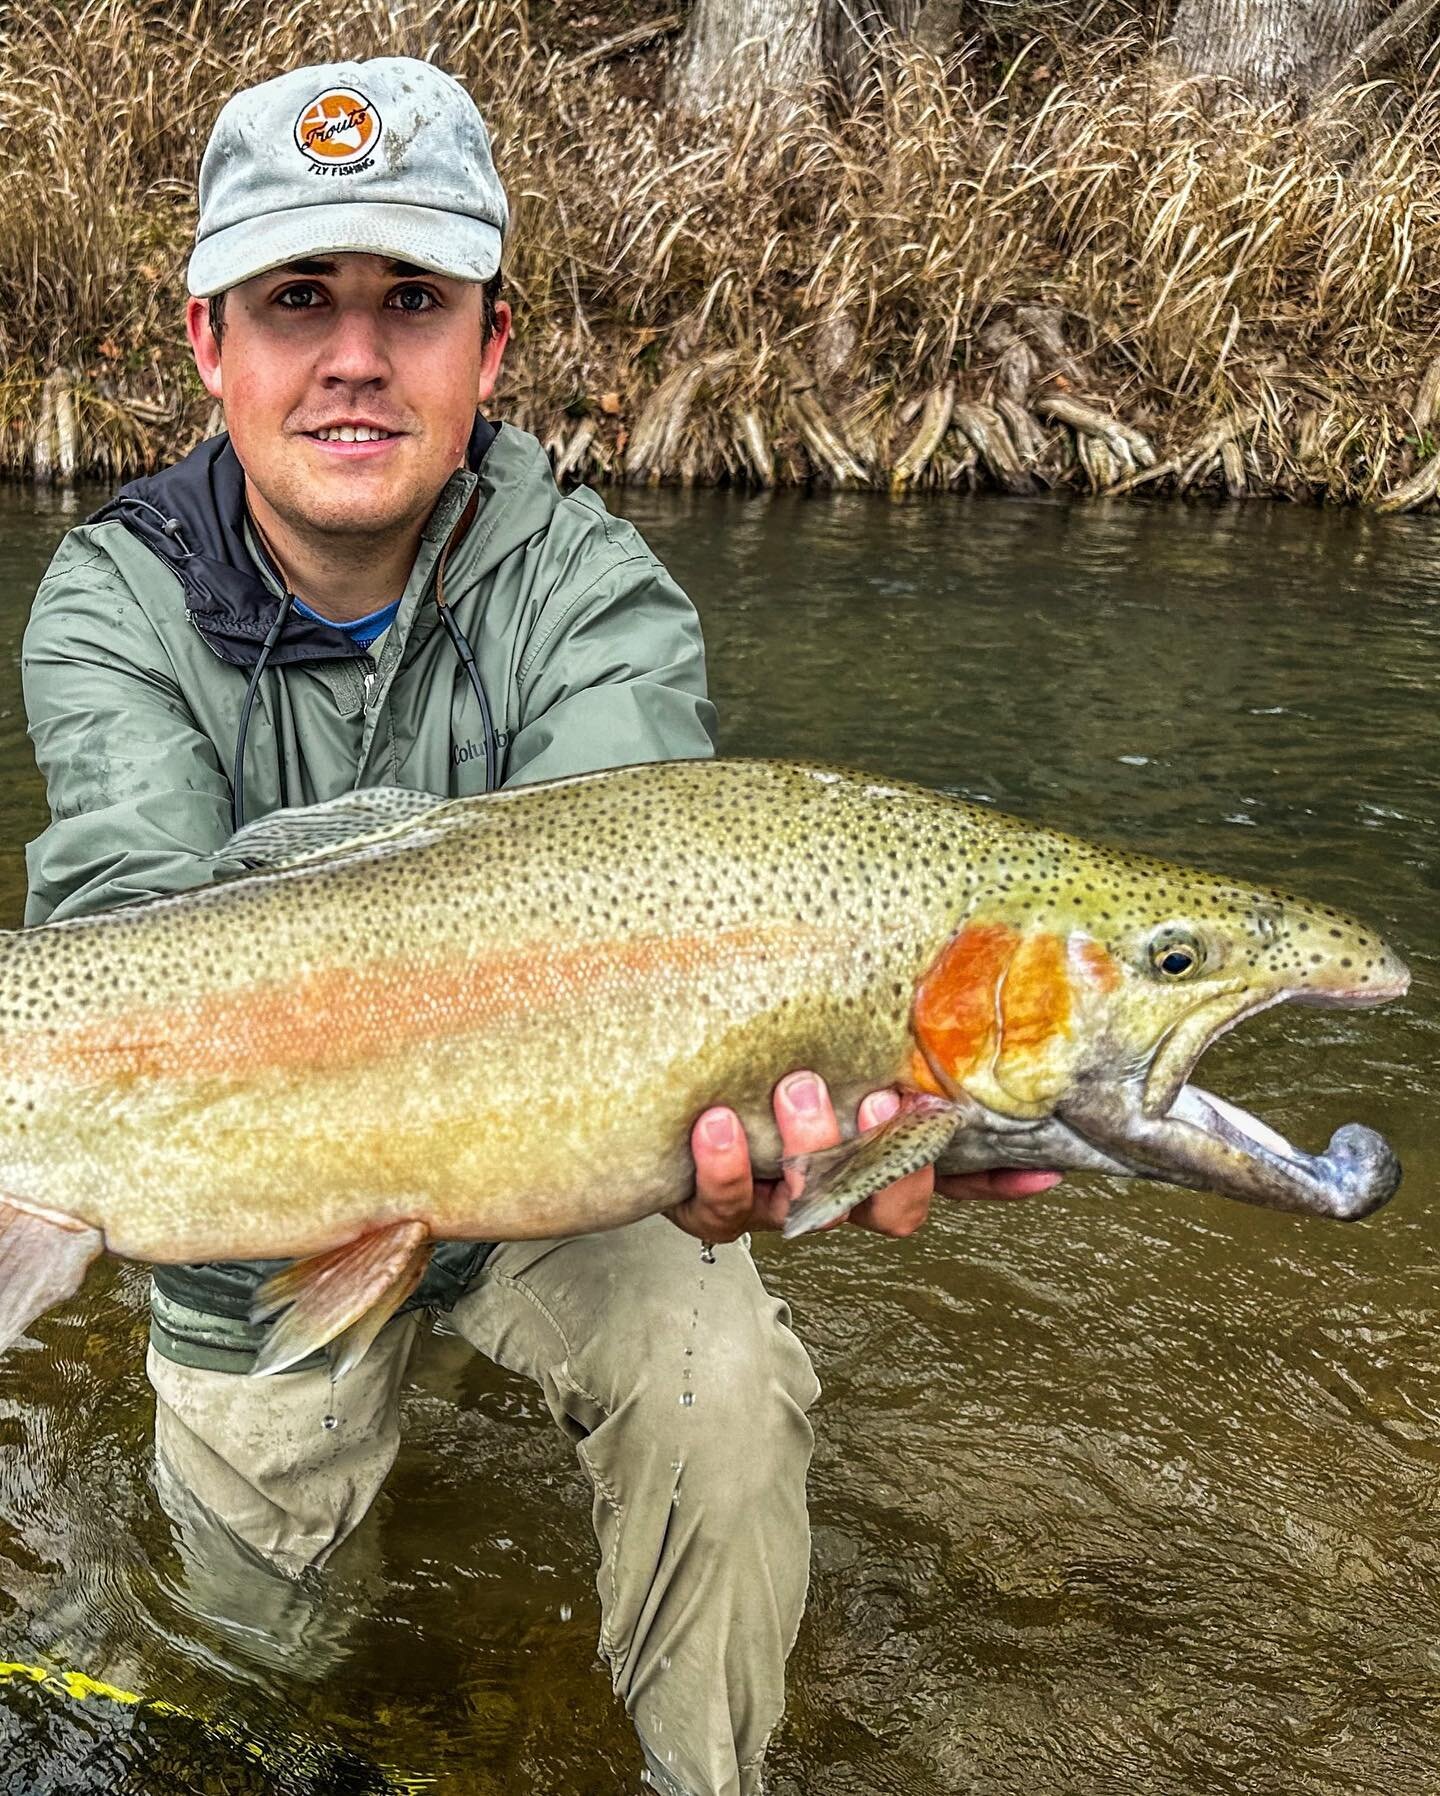 Trout season is here and we&rsquo;re ready for some great days on the water! Call, stop by the shop, or book online. Gift certificates available as well. Trout clinic dates will be posted soon.